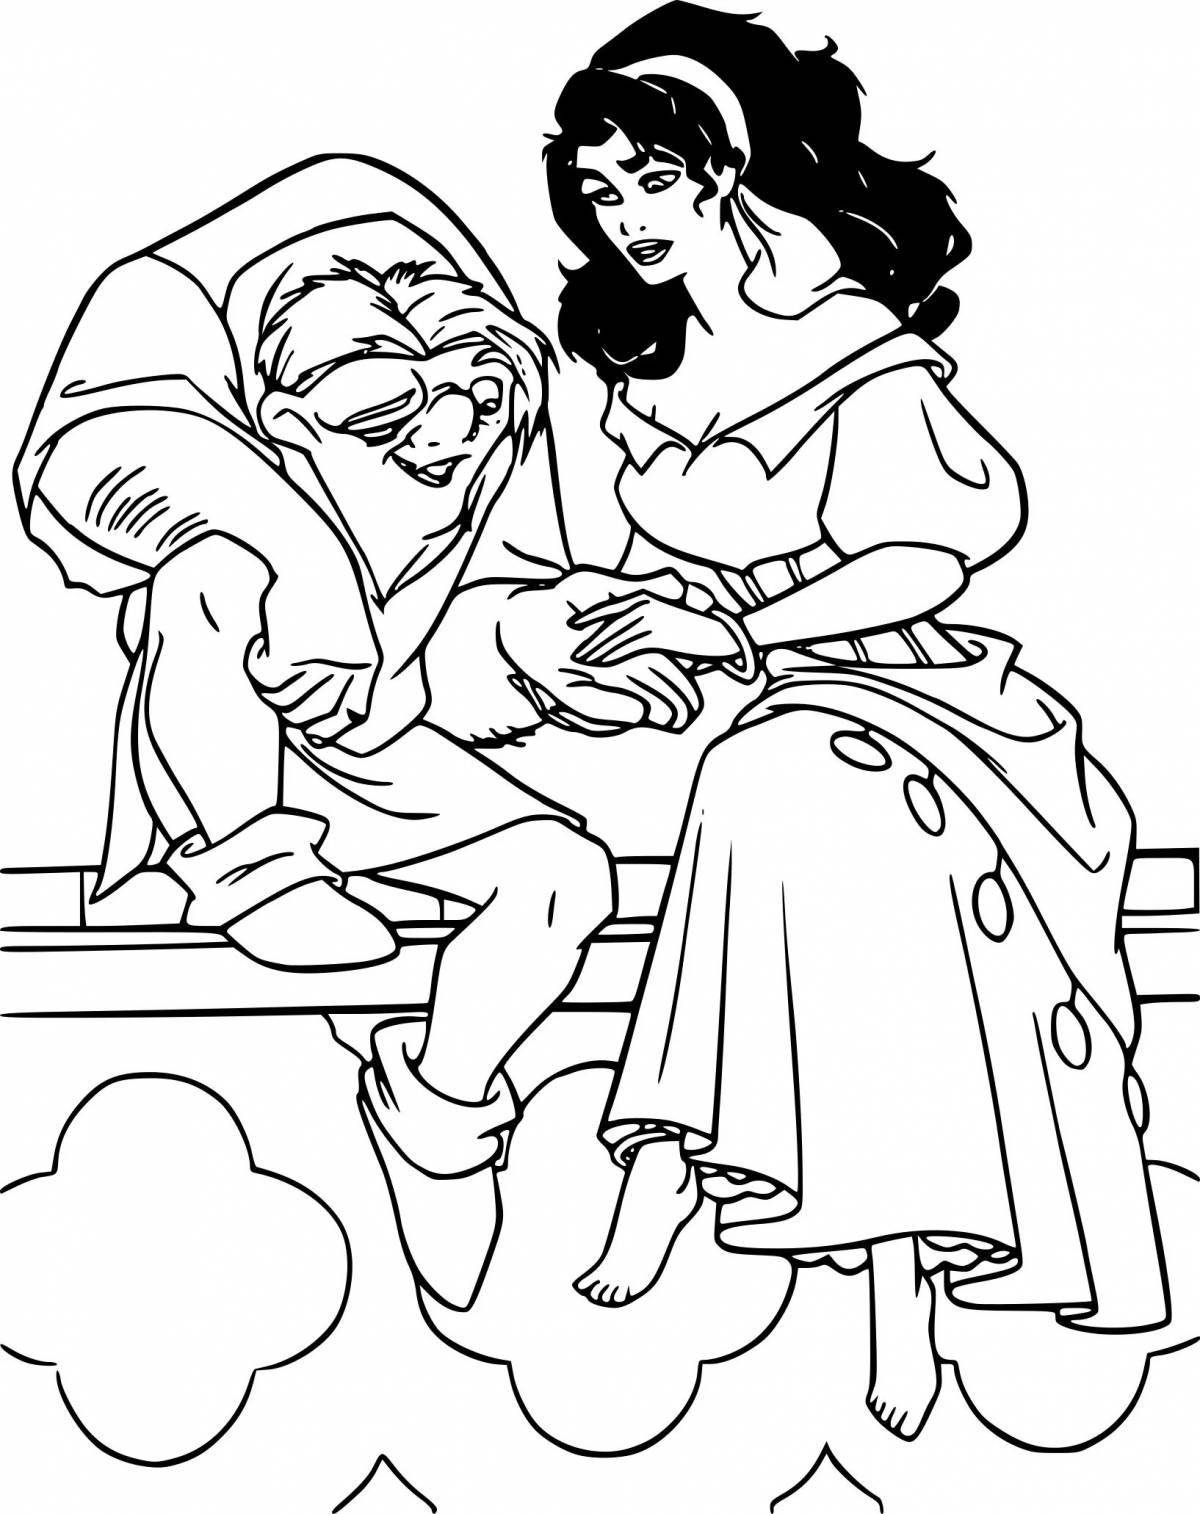 Gypsy girl coloring page